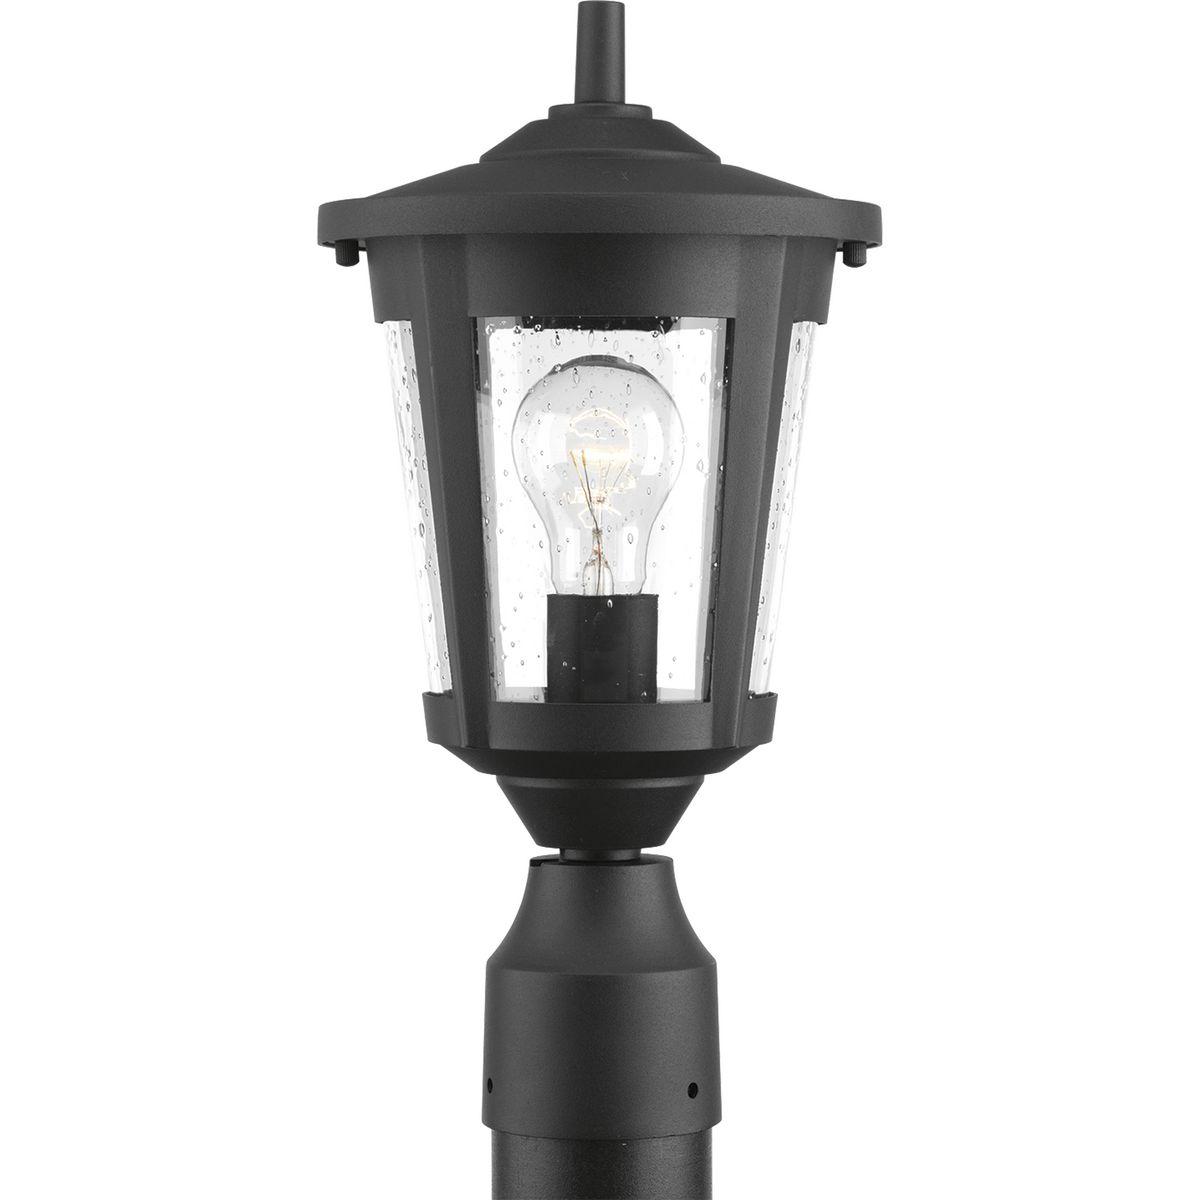 Hubbell P6425-31 The East Haven Collection offers modern styling to complement a wide variety of home styles. The one-light post lantern has a Black frame that cradles a seeded glass shade. Fits 3" post (order separately). Hanging and wall mounting fixtures complete the c